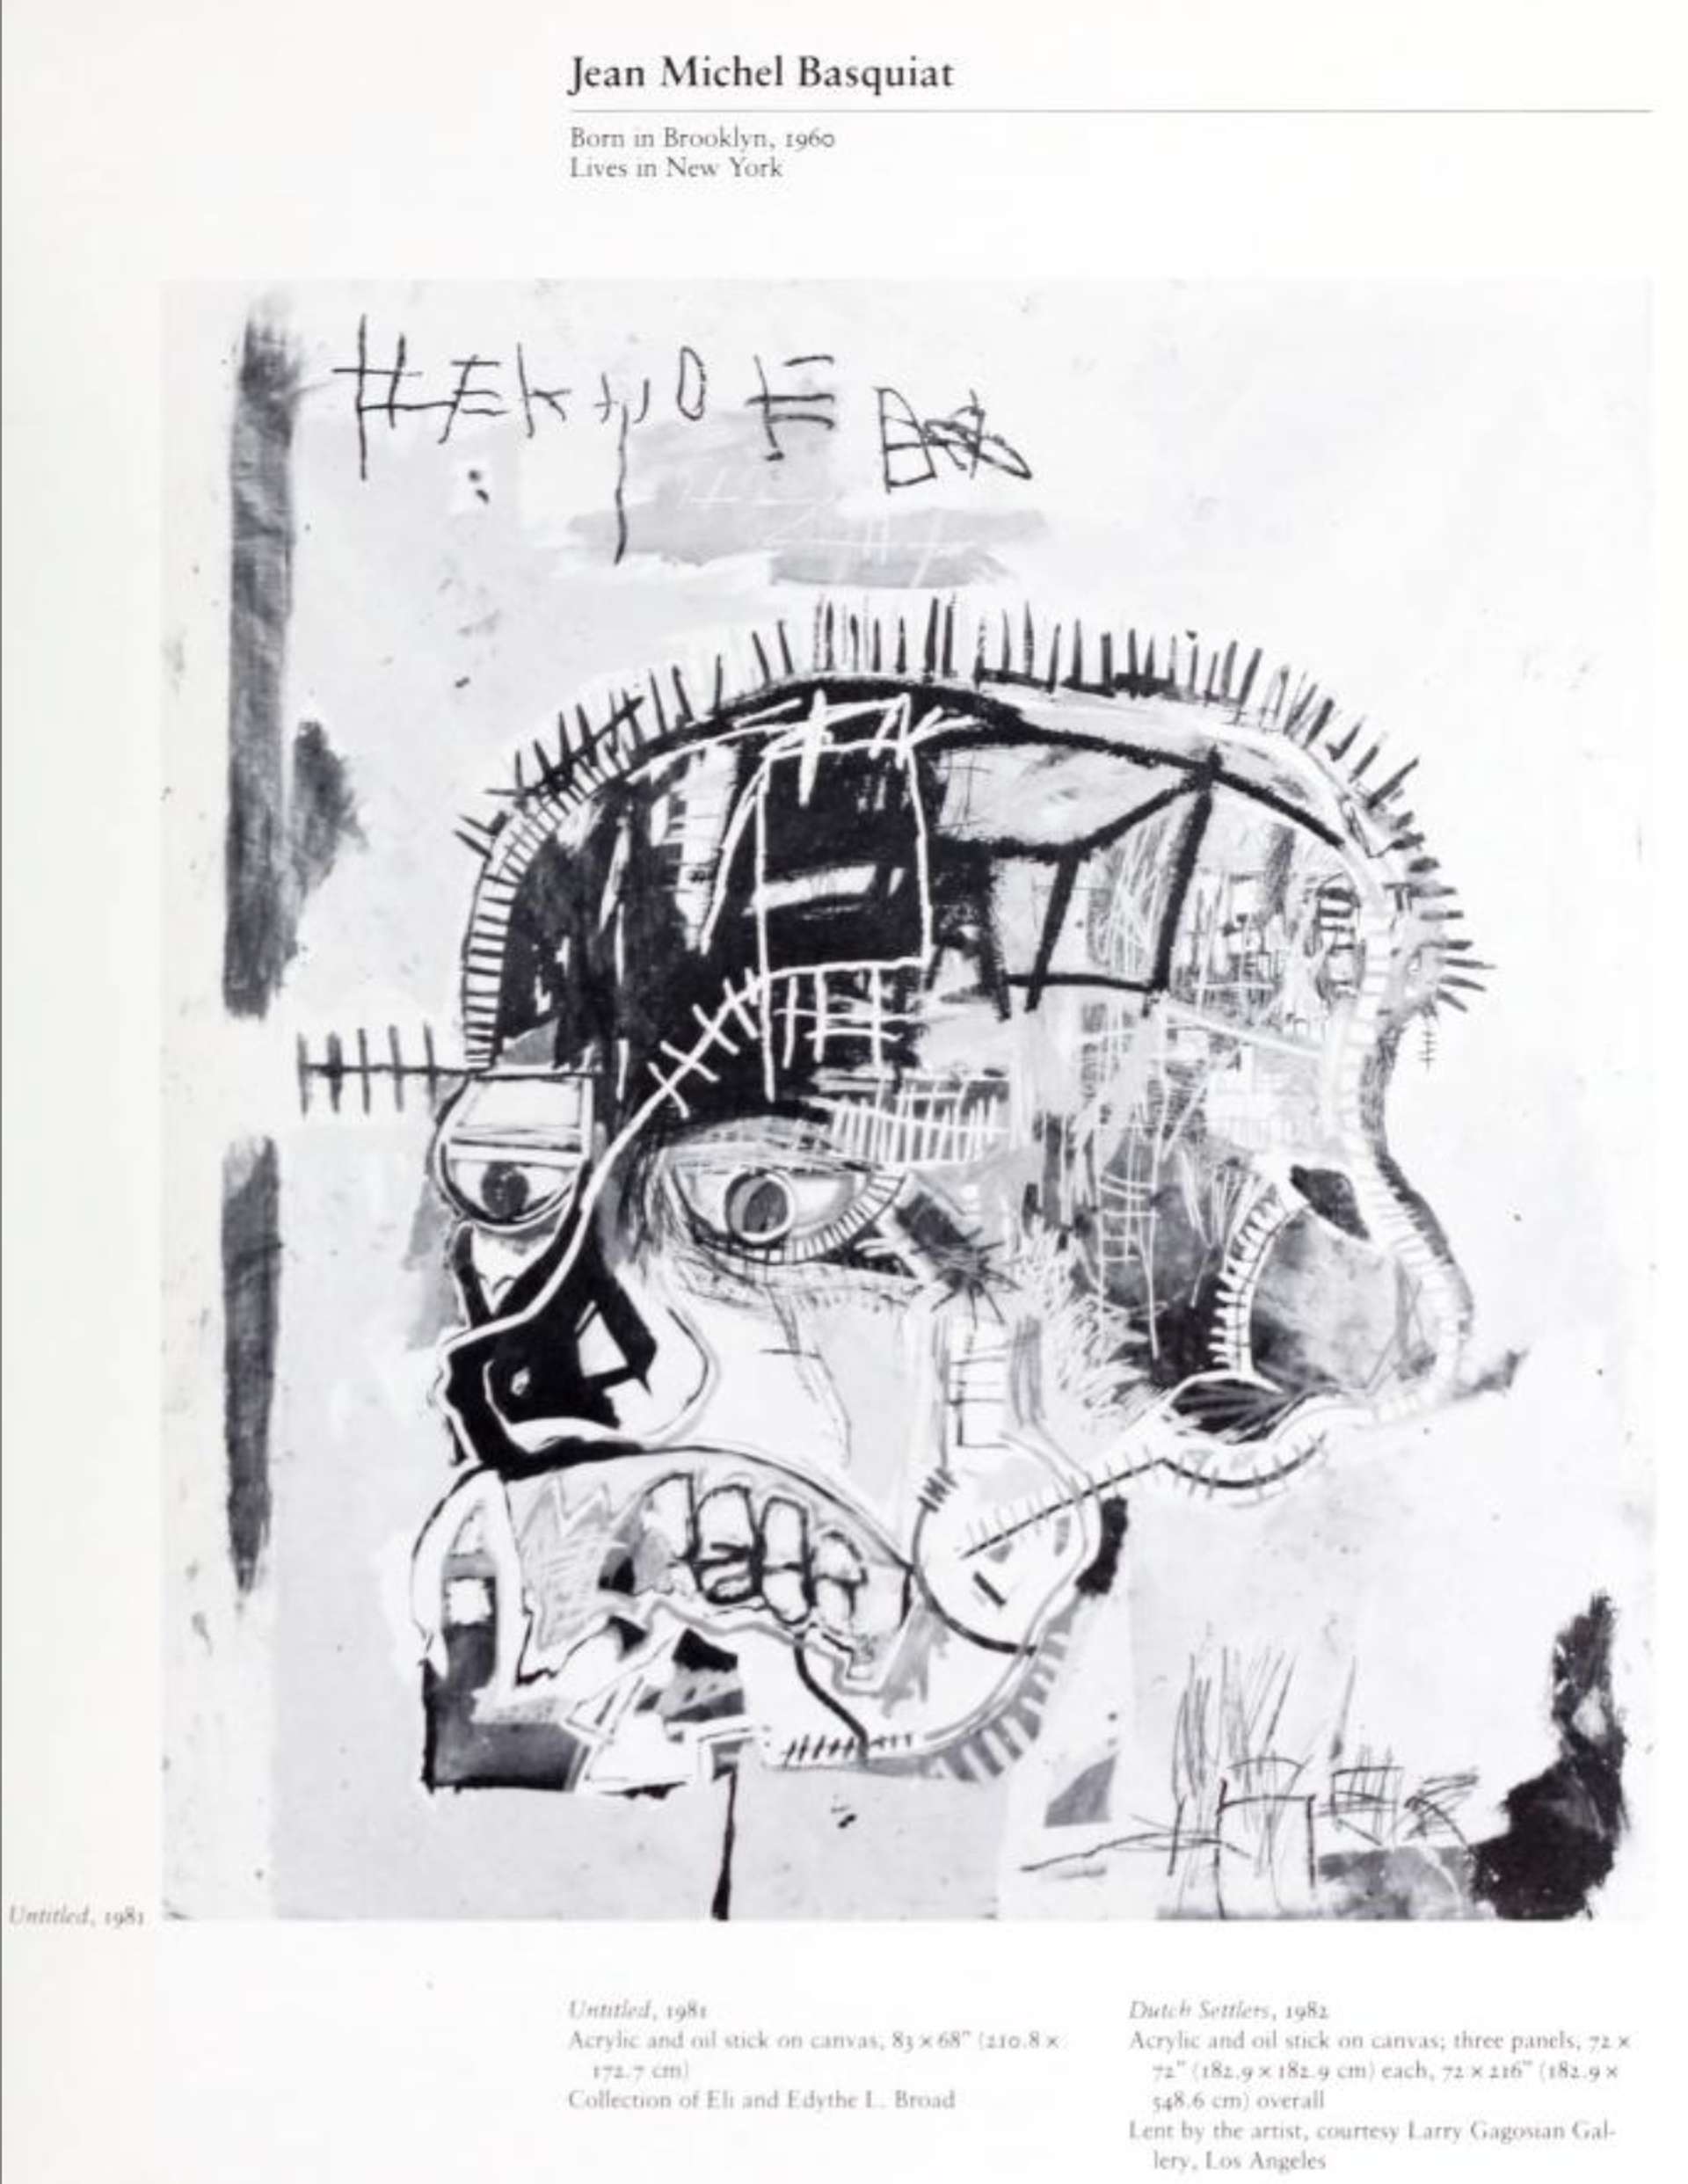 A black-and-white image of Basquiat’s page within the catalogue for the 1983 Whitney Biennial. It shows one of his skulls, Untitled (1981).